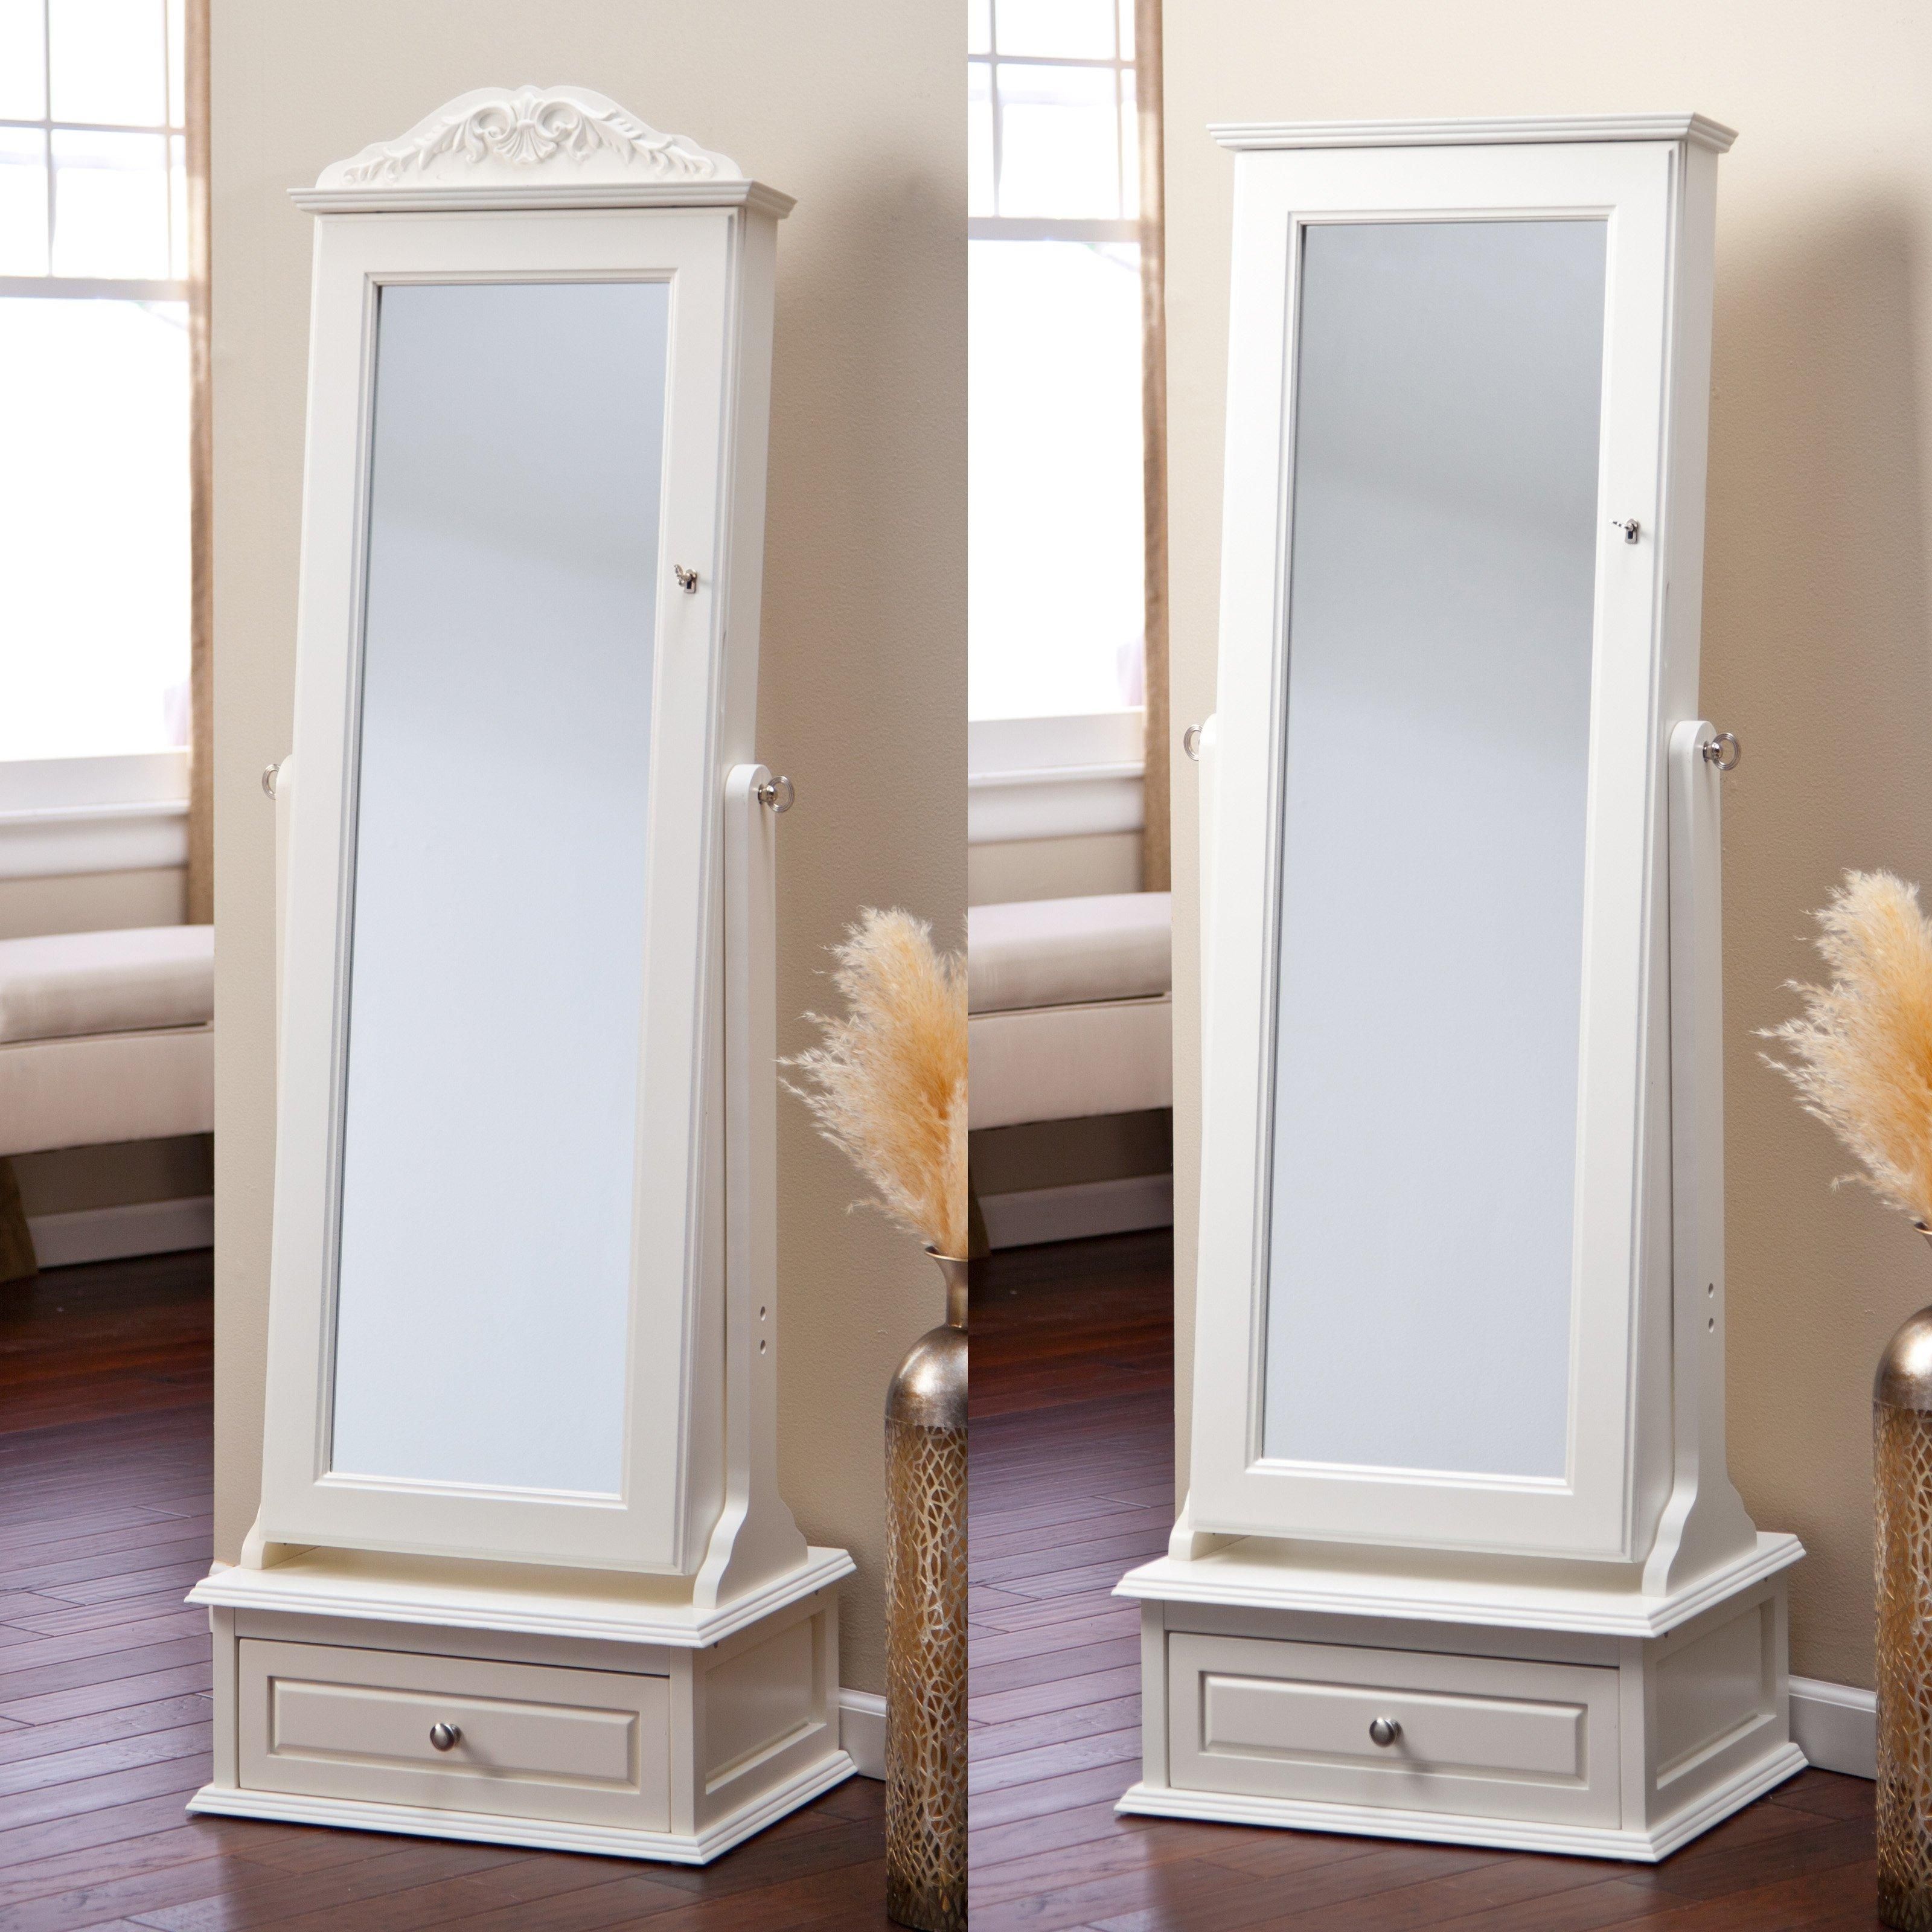 Jewelry Cabinet Mirror Free Standing – Harpsounds (View 5 of 20)